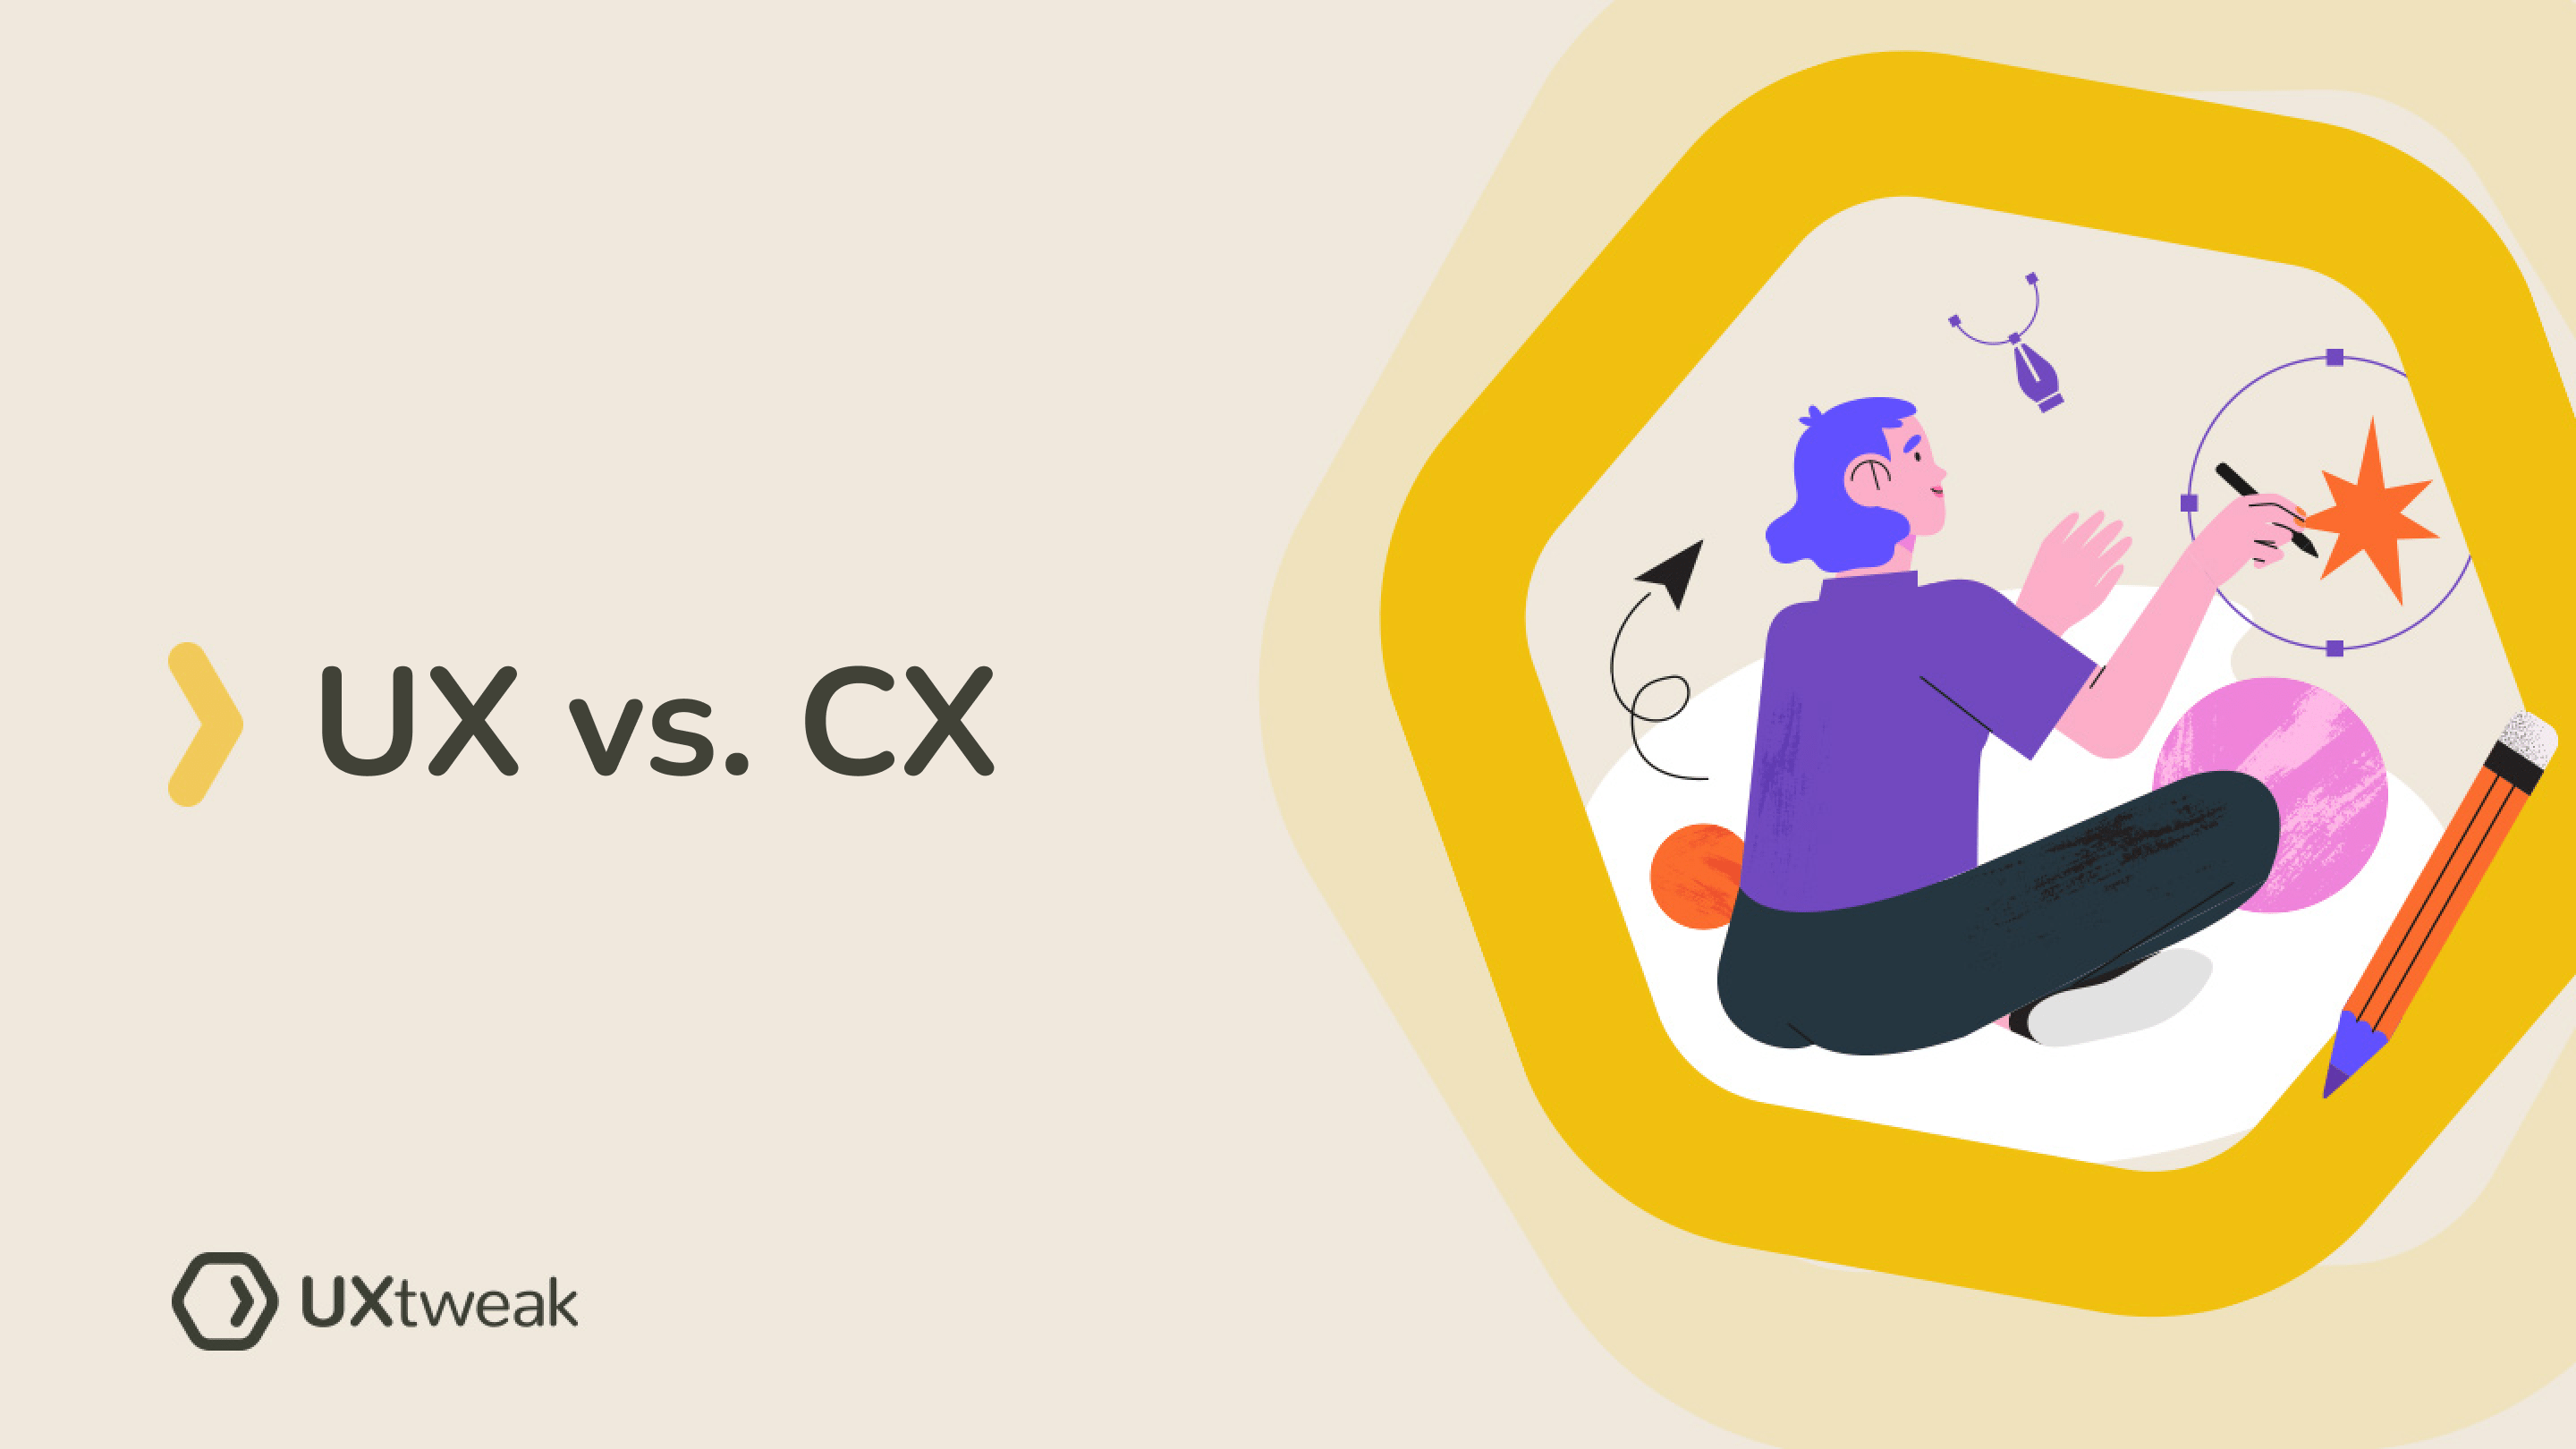 UX vs. CX: What’s the Difference?